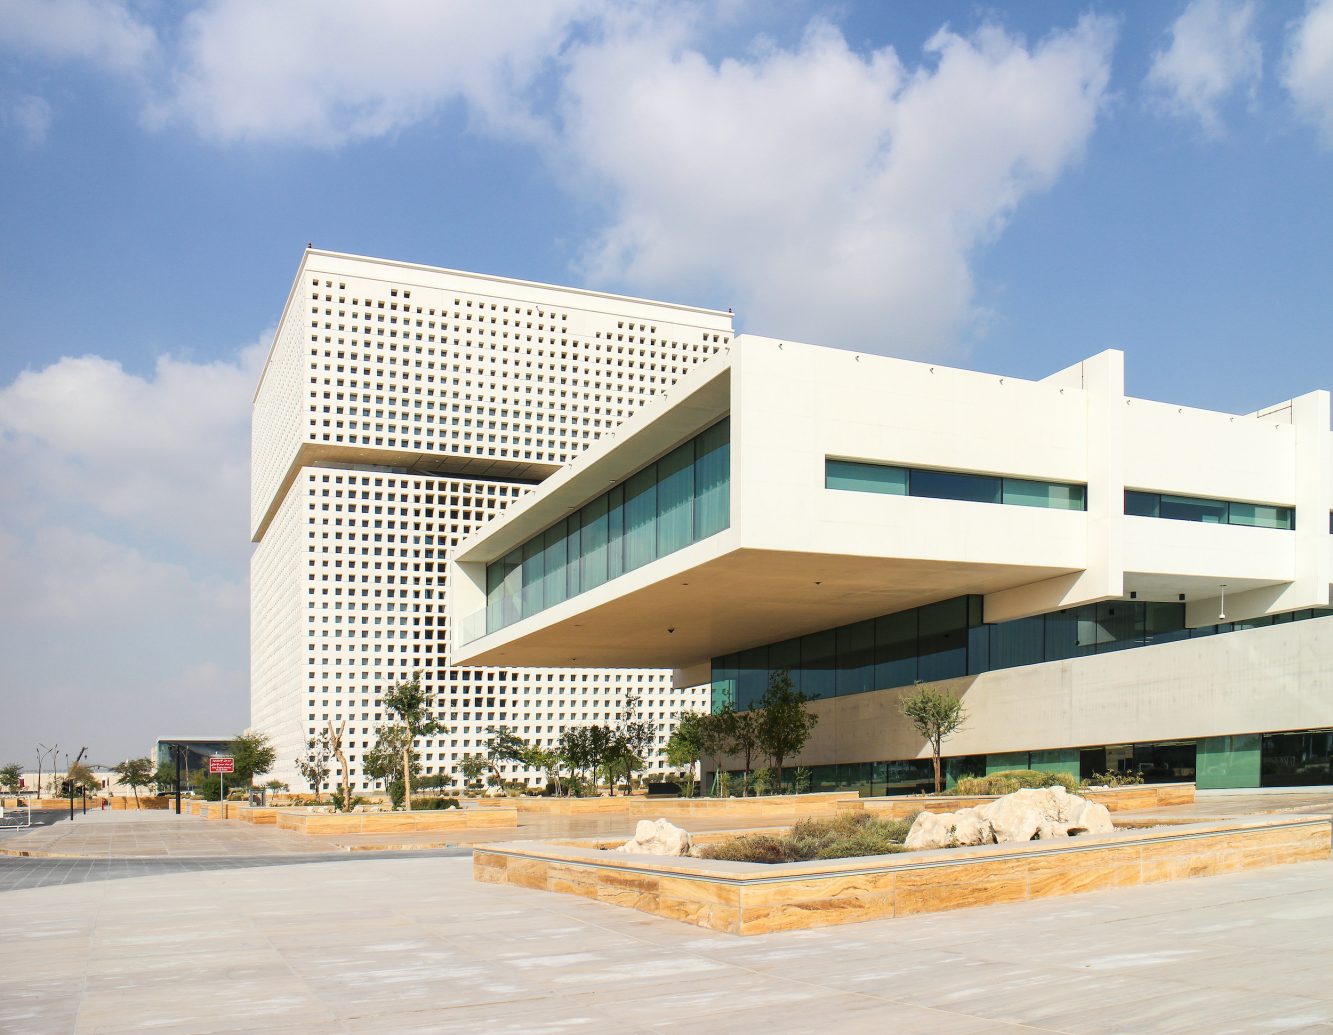 Qatar Foundation waives housing fees for students living on campus due to Coronavirus